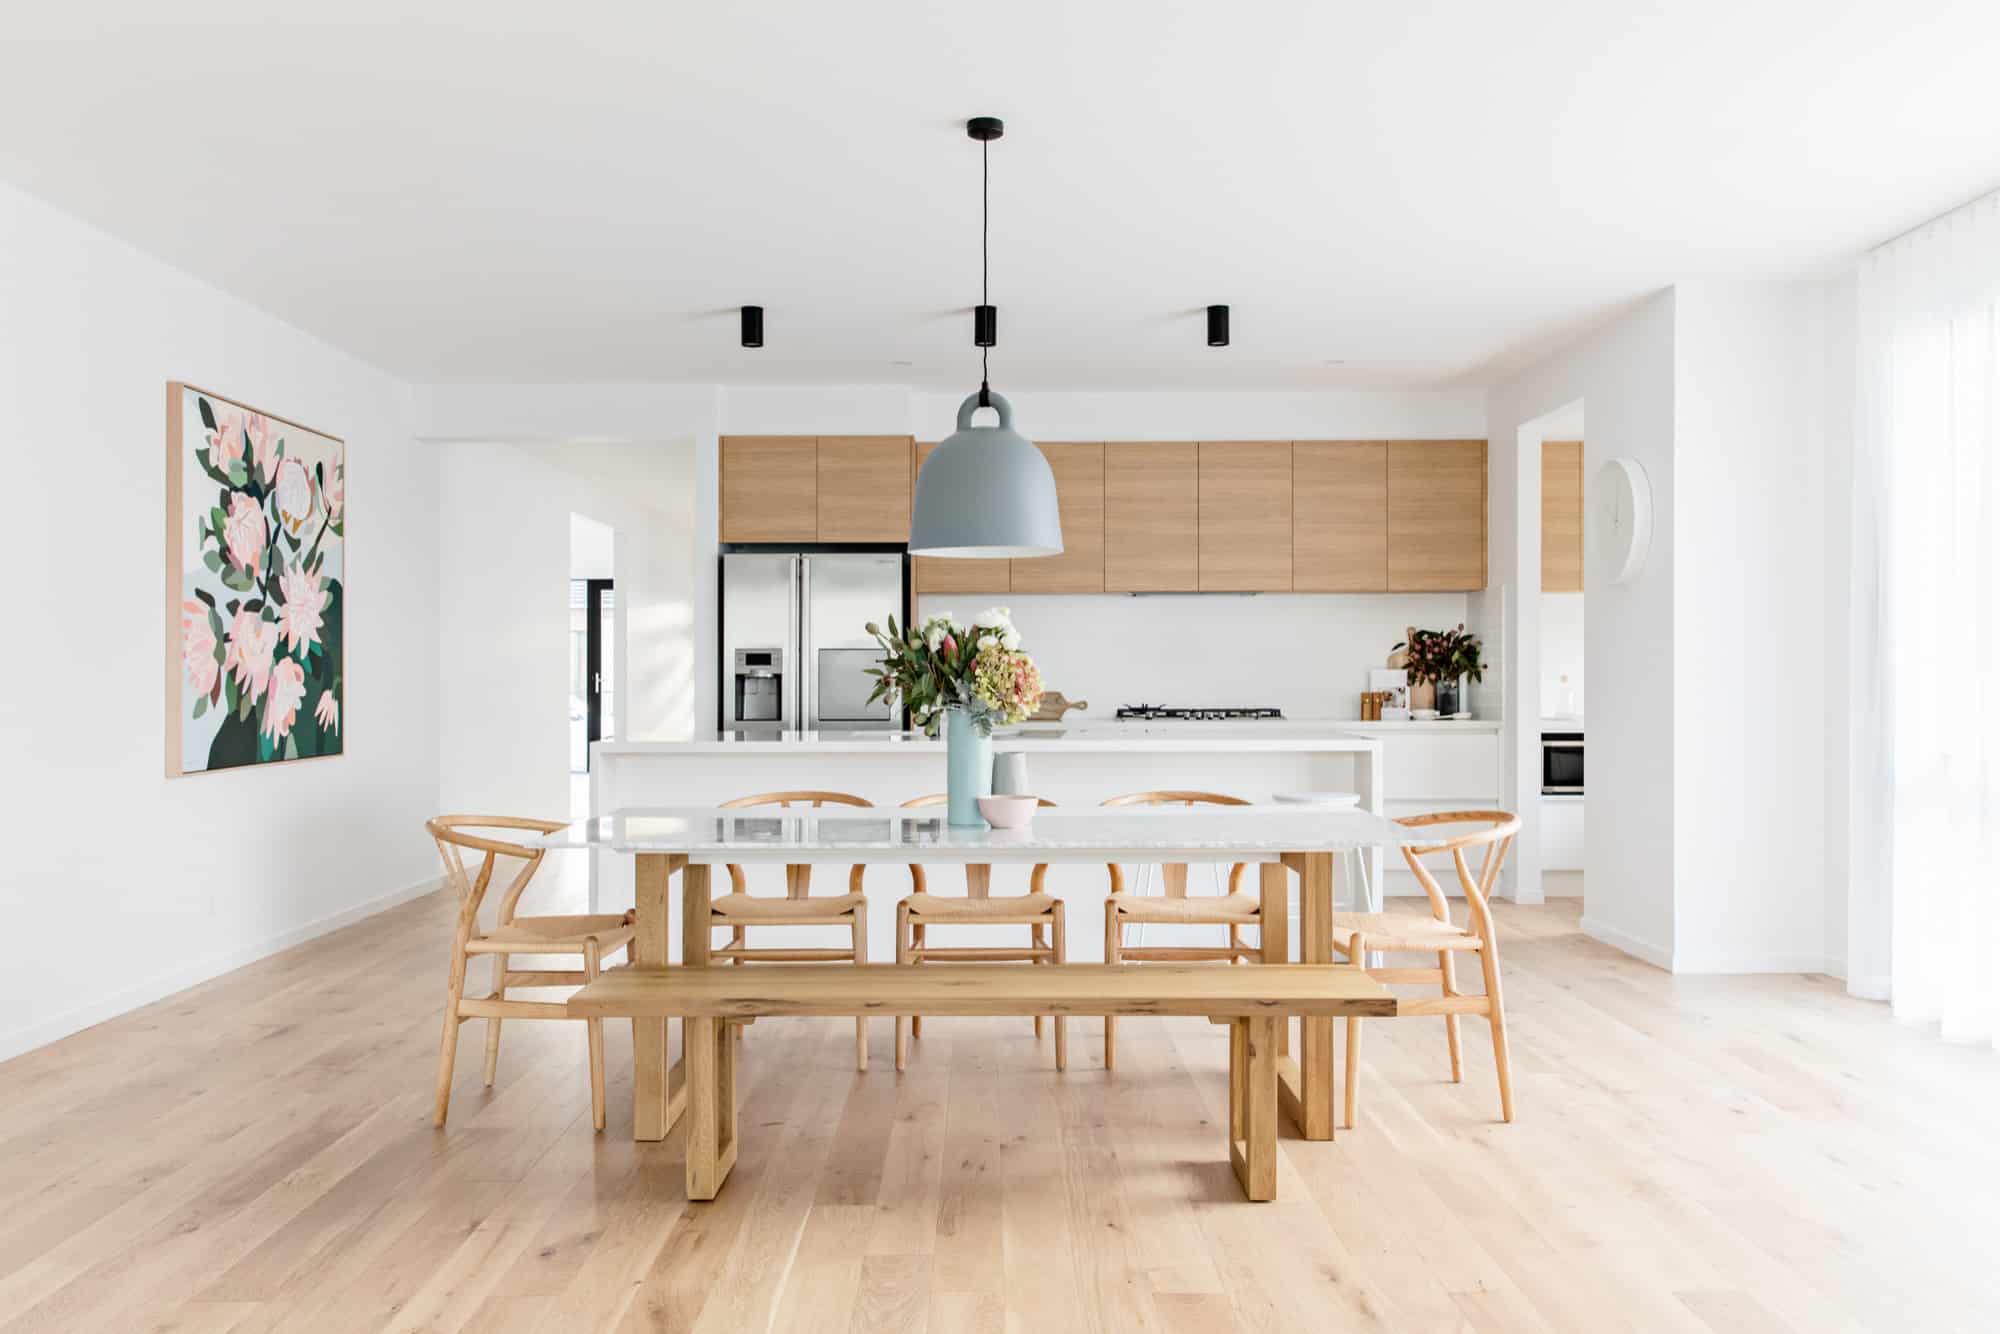 What are the pros and cons of opting for a Scandinavian dining room design